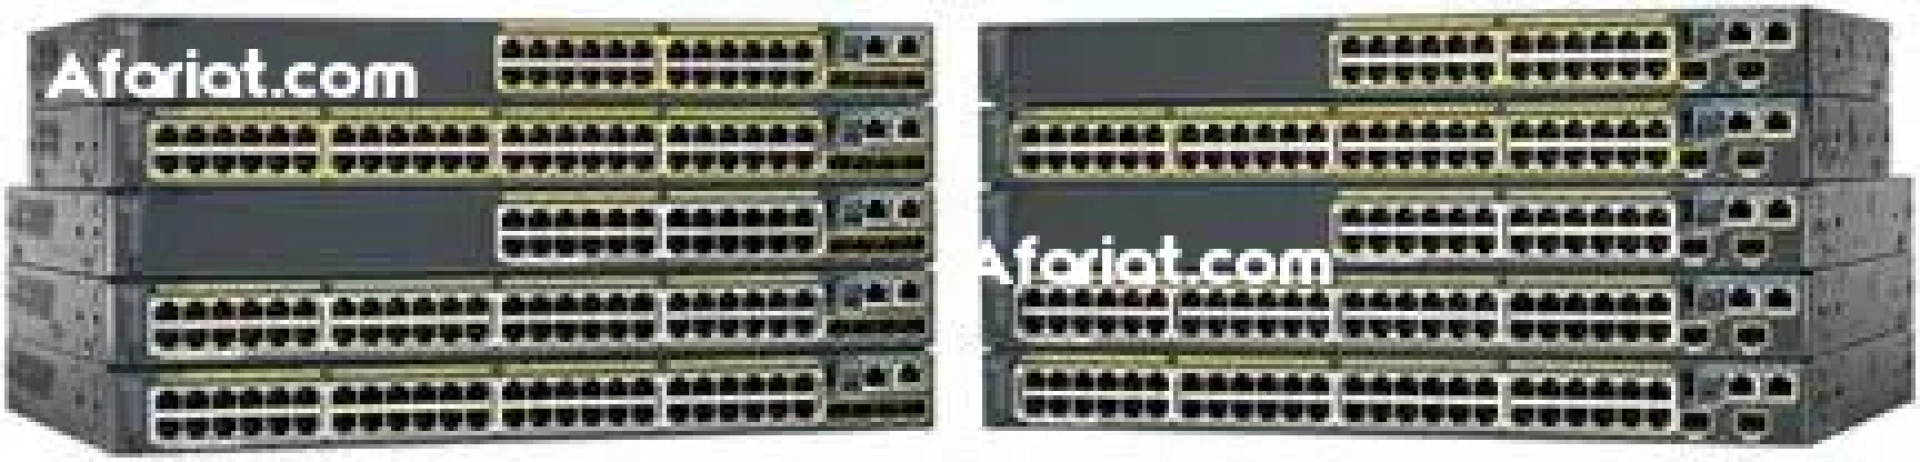 Cisco Catalyst 2960-S switches feature: